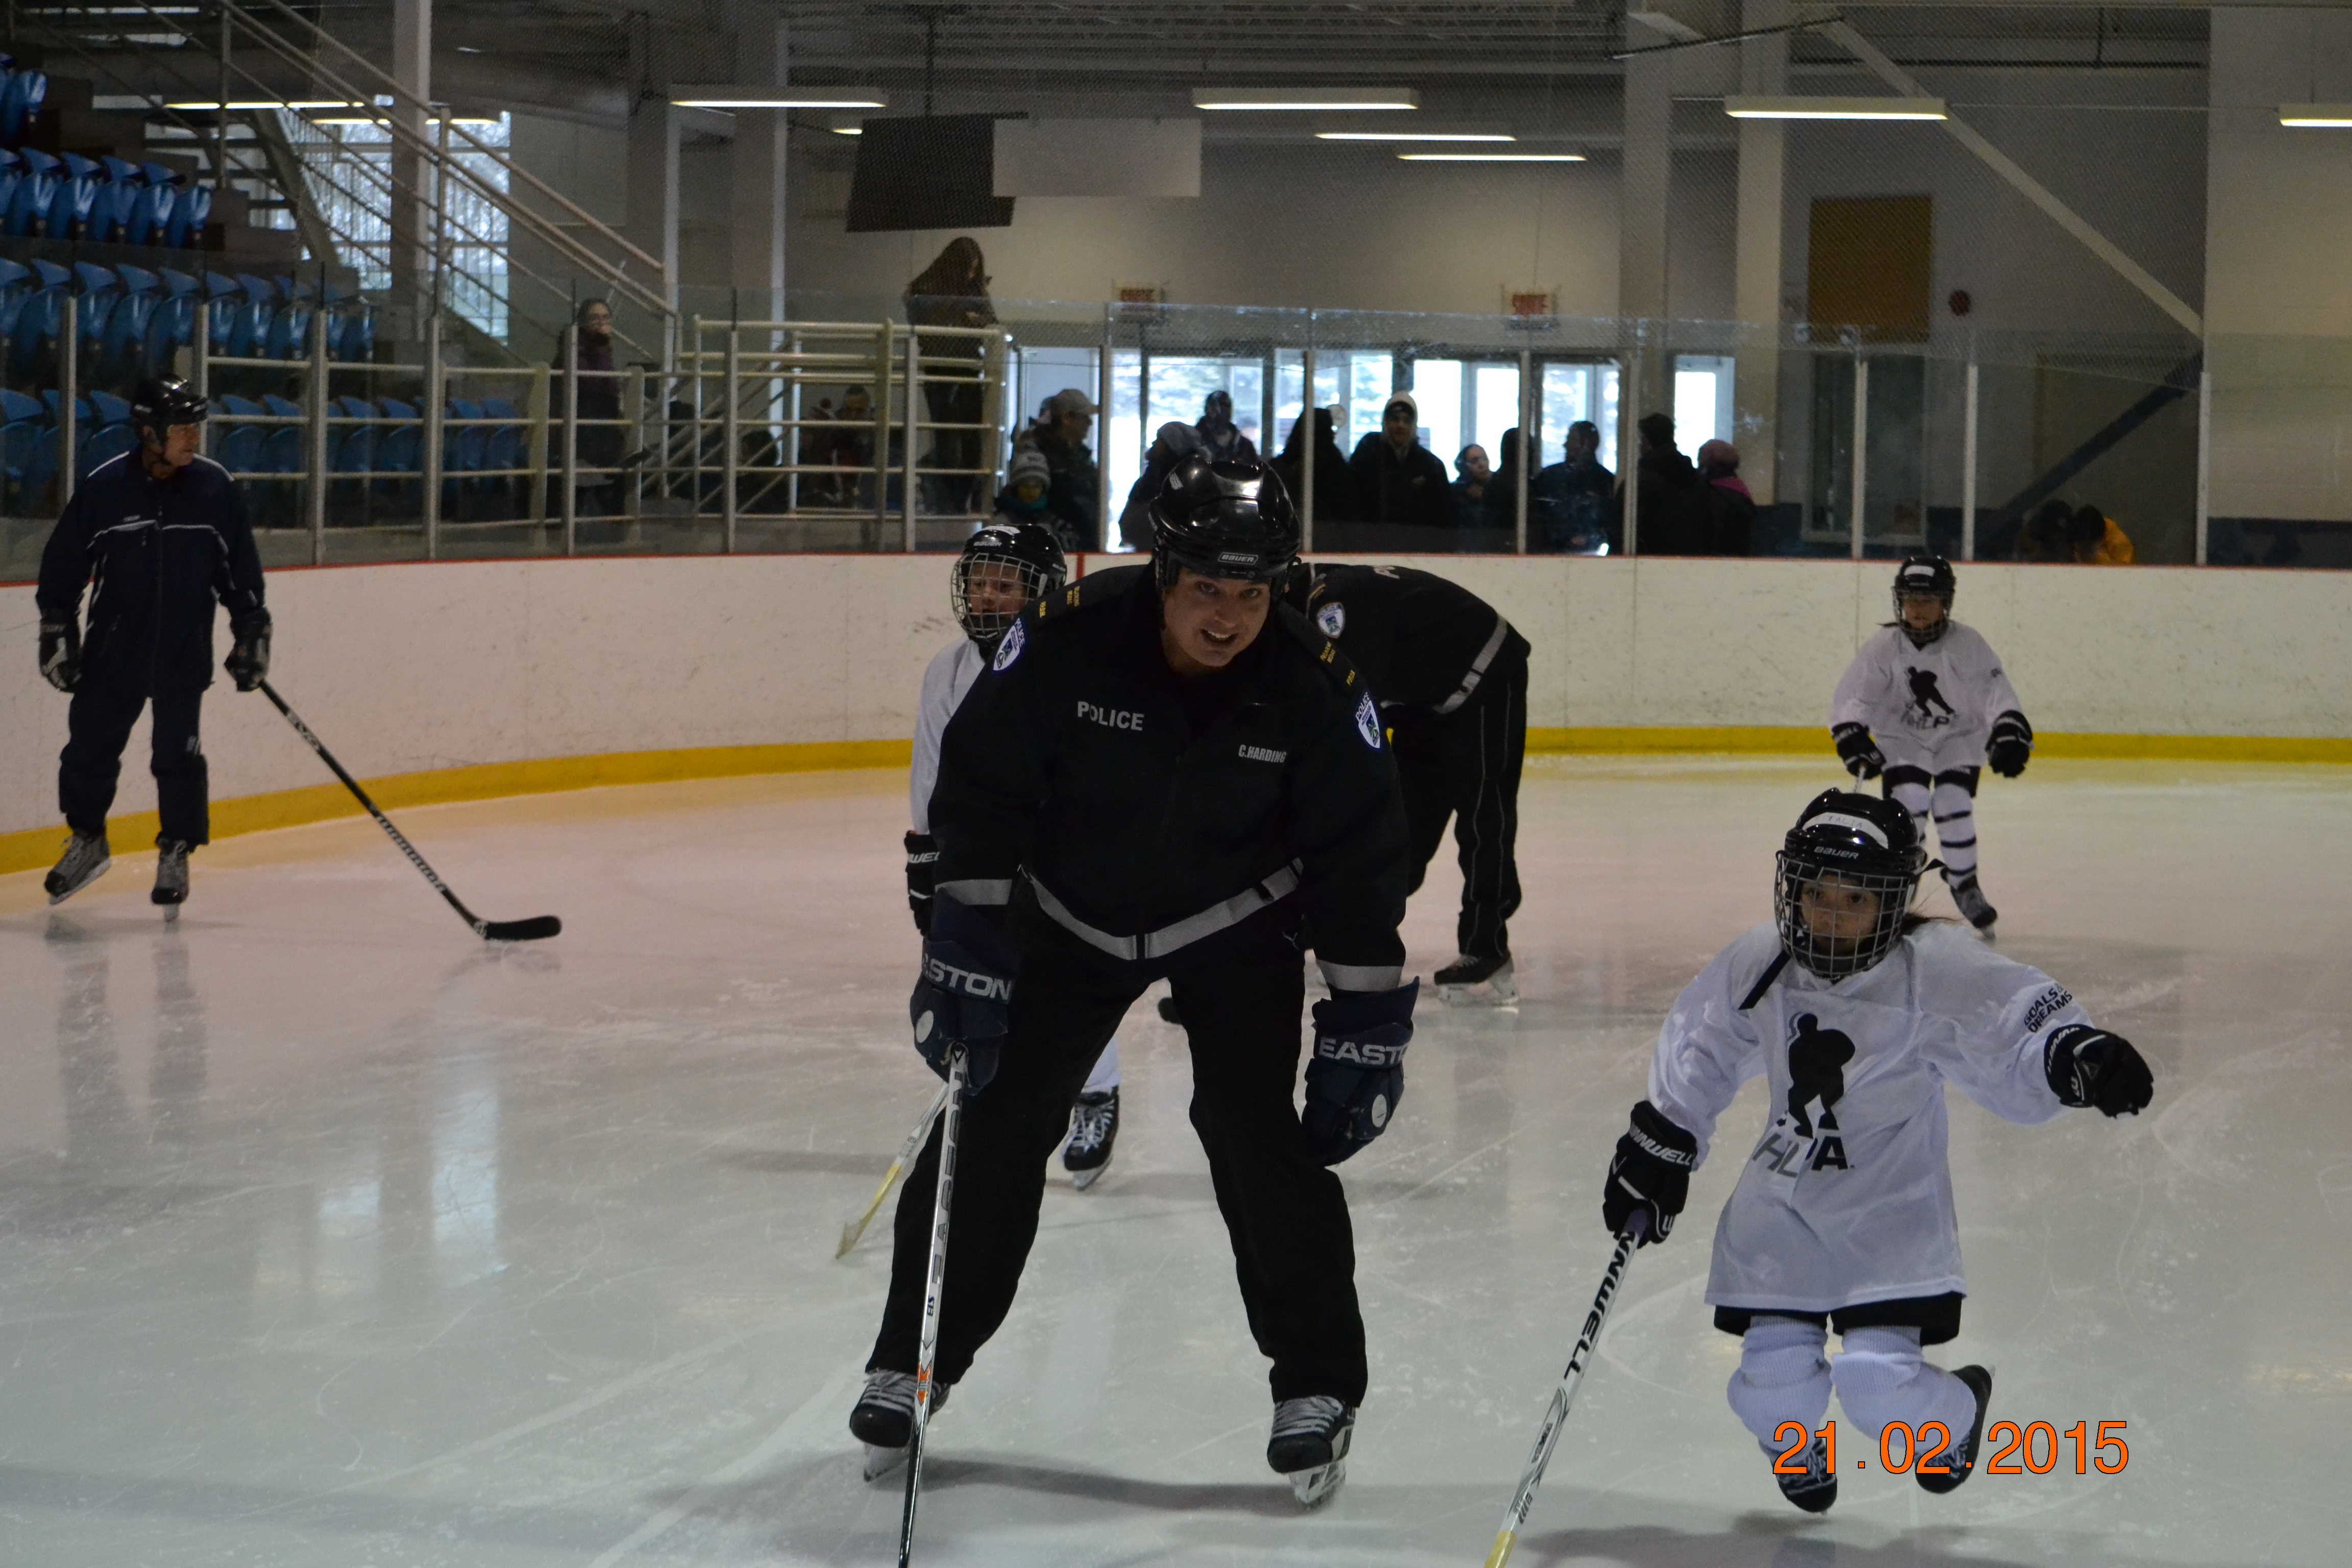 Tournament and Ville Deux-Montagnes Officer Chris Harding teaching a child to skate as part of the Les Forces police hockey program